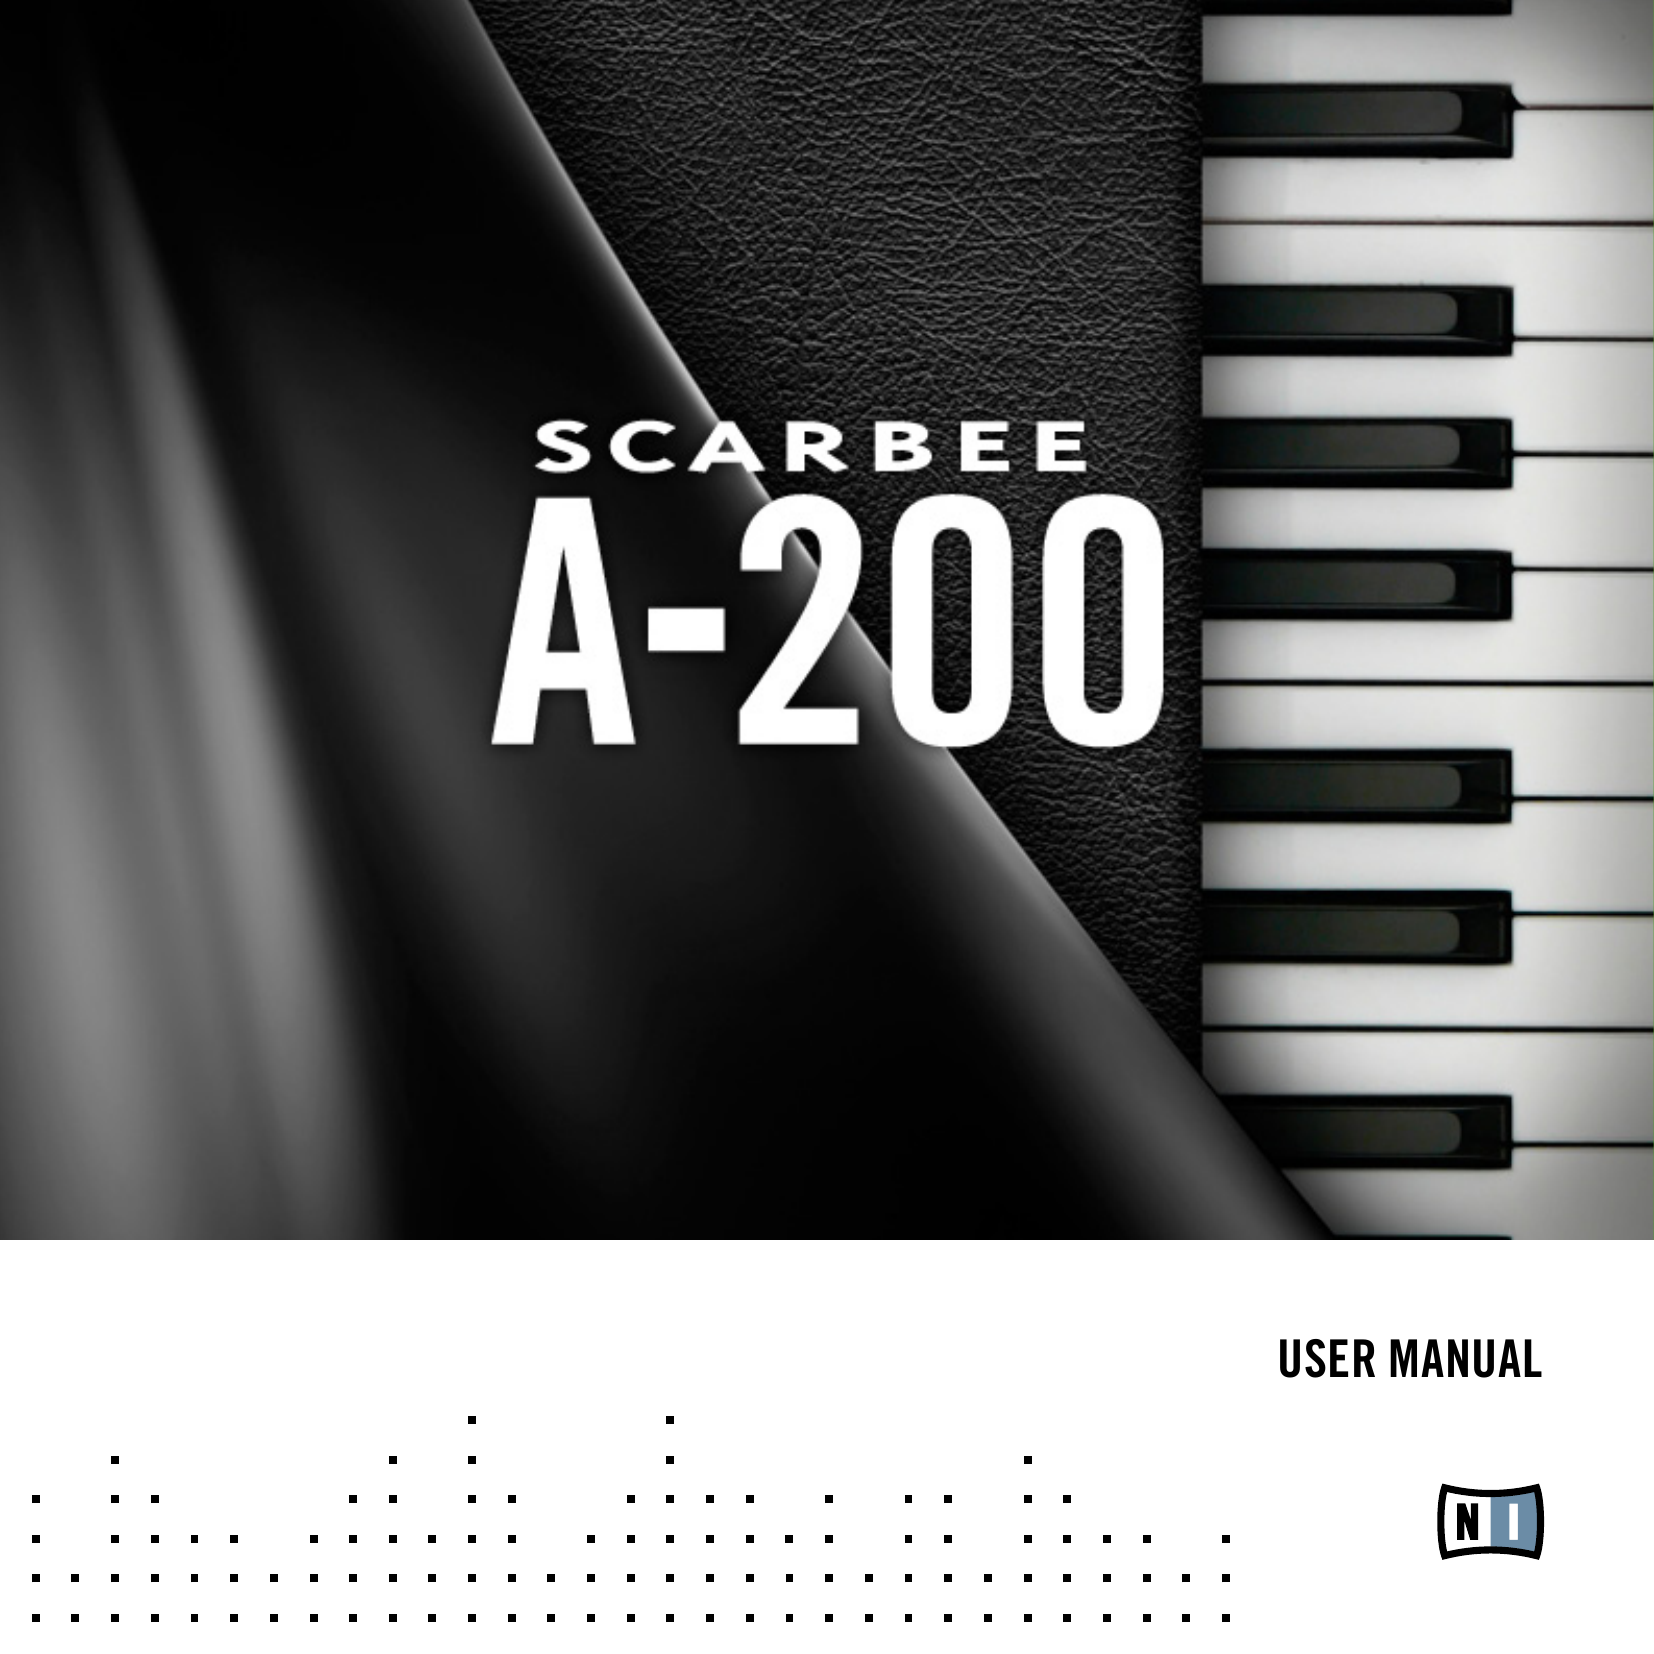 scarbee a200